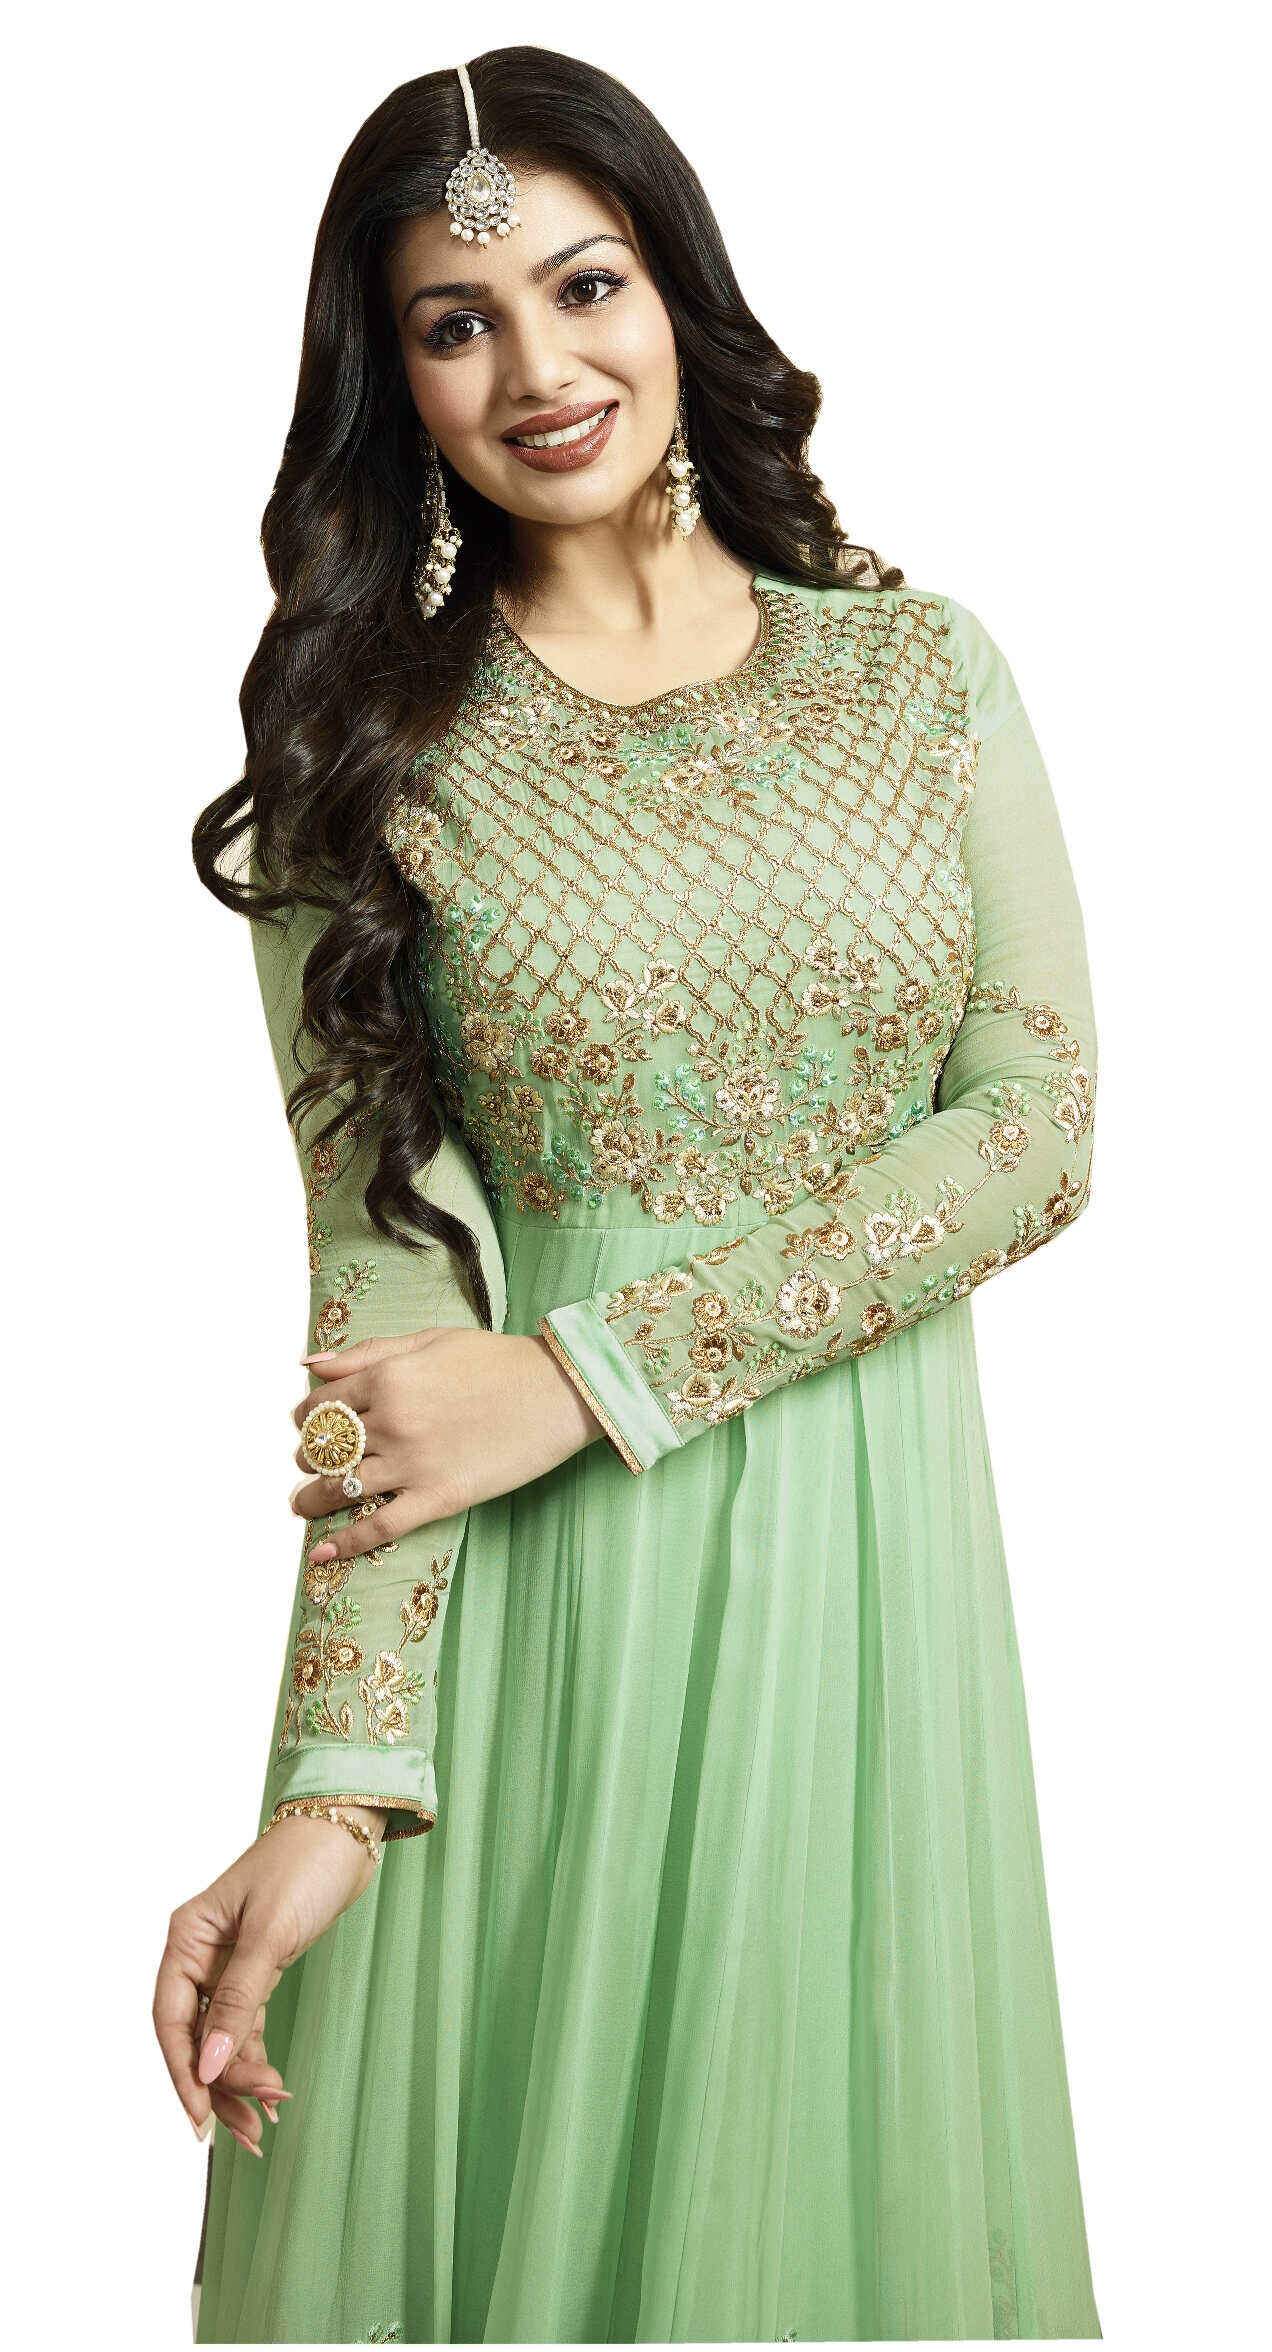 Sea Green with Golden Floral Embroidery Anarkali Suit